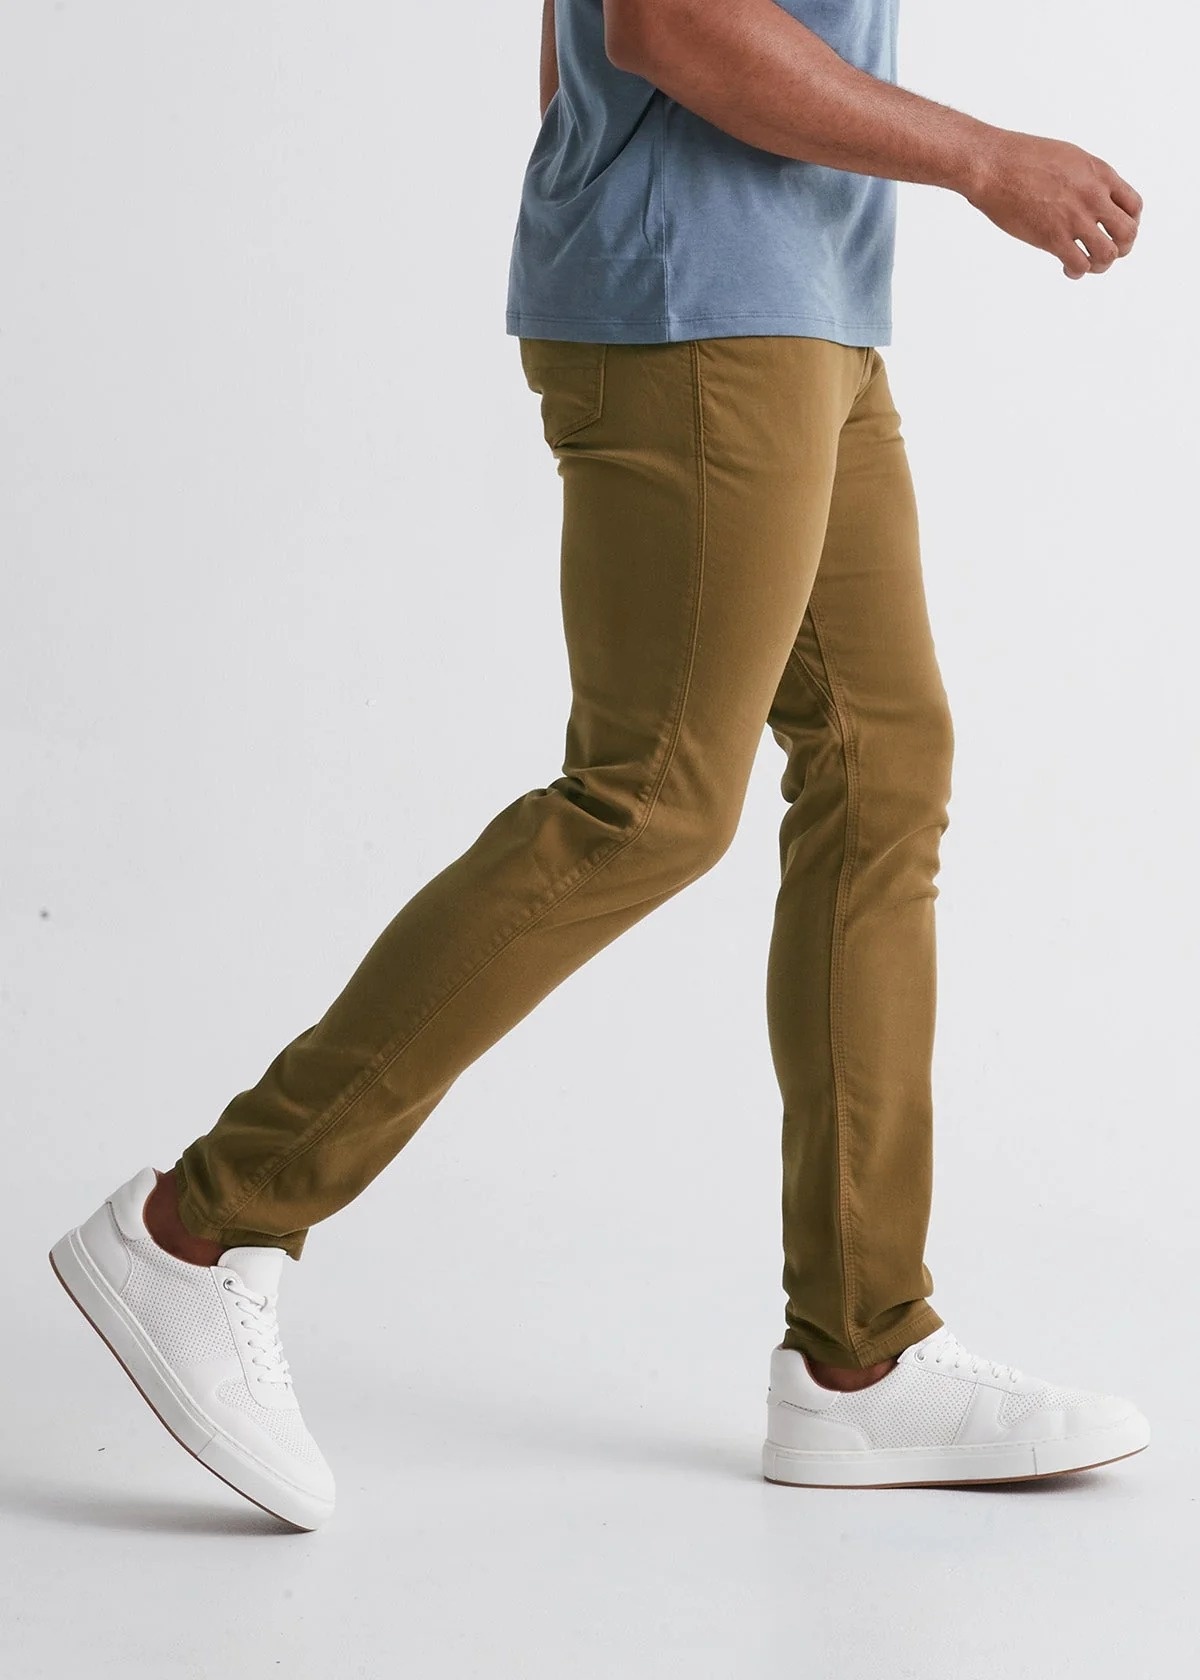 Duer No Sweat Relaxed Pant - Tobacco - MODA3